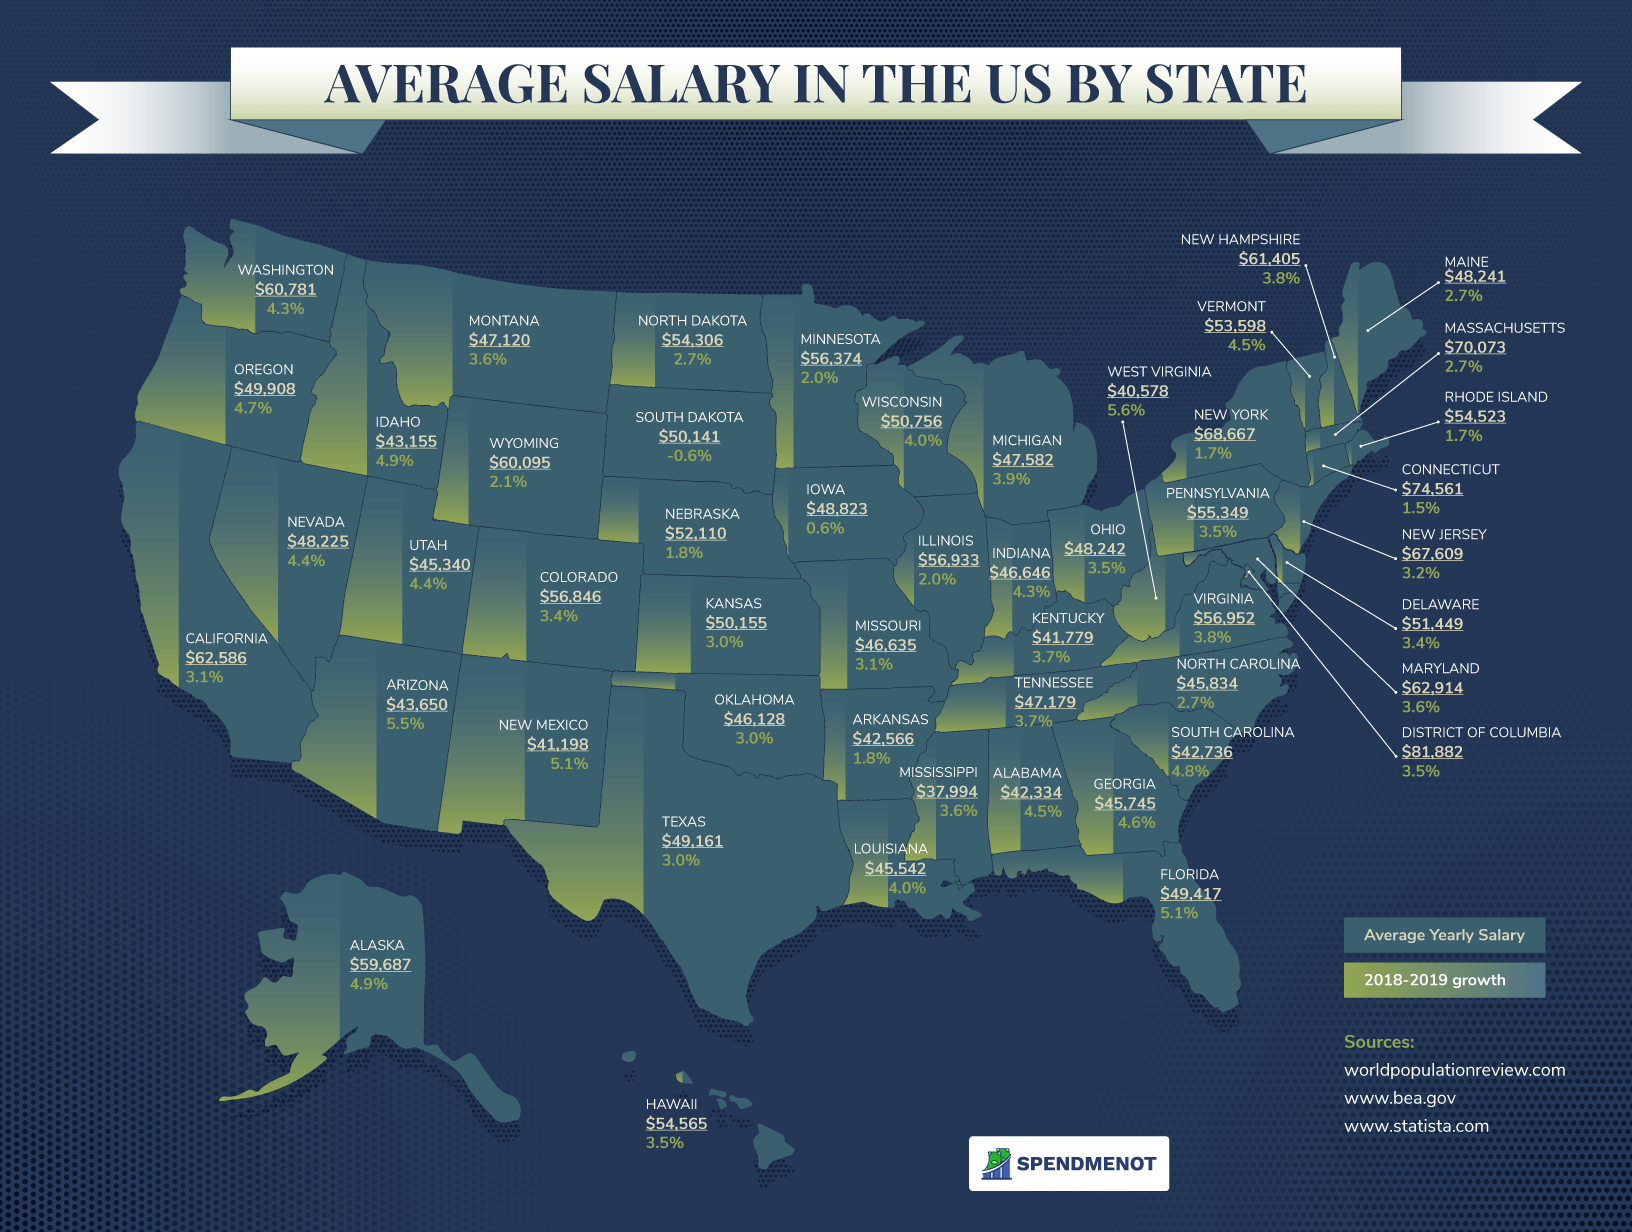 Average Salary by State - A Map